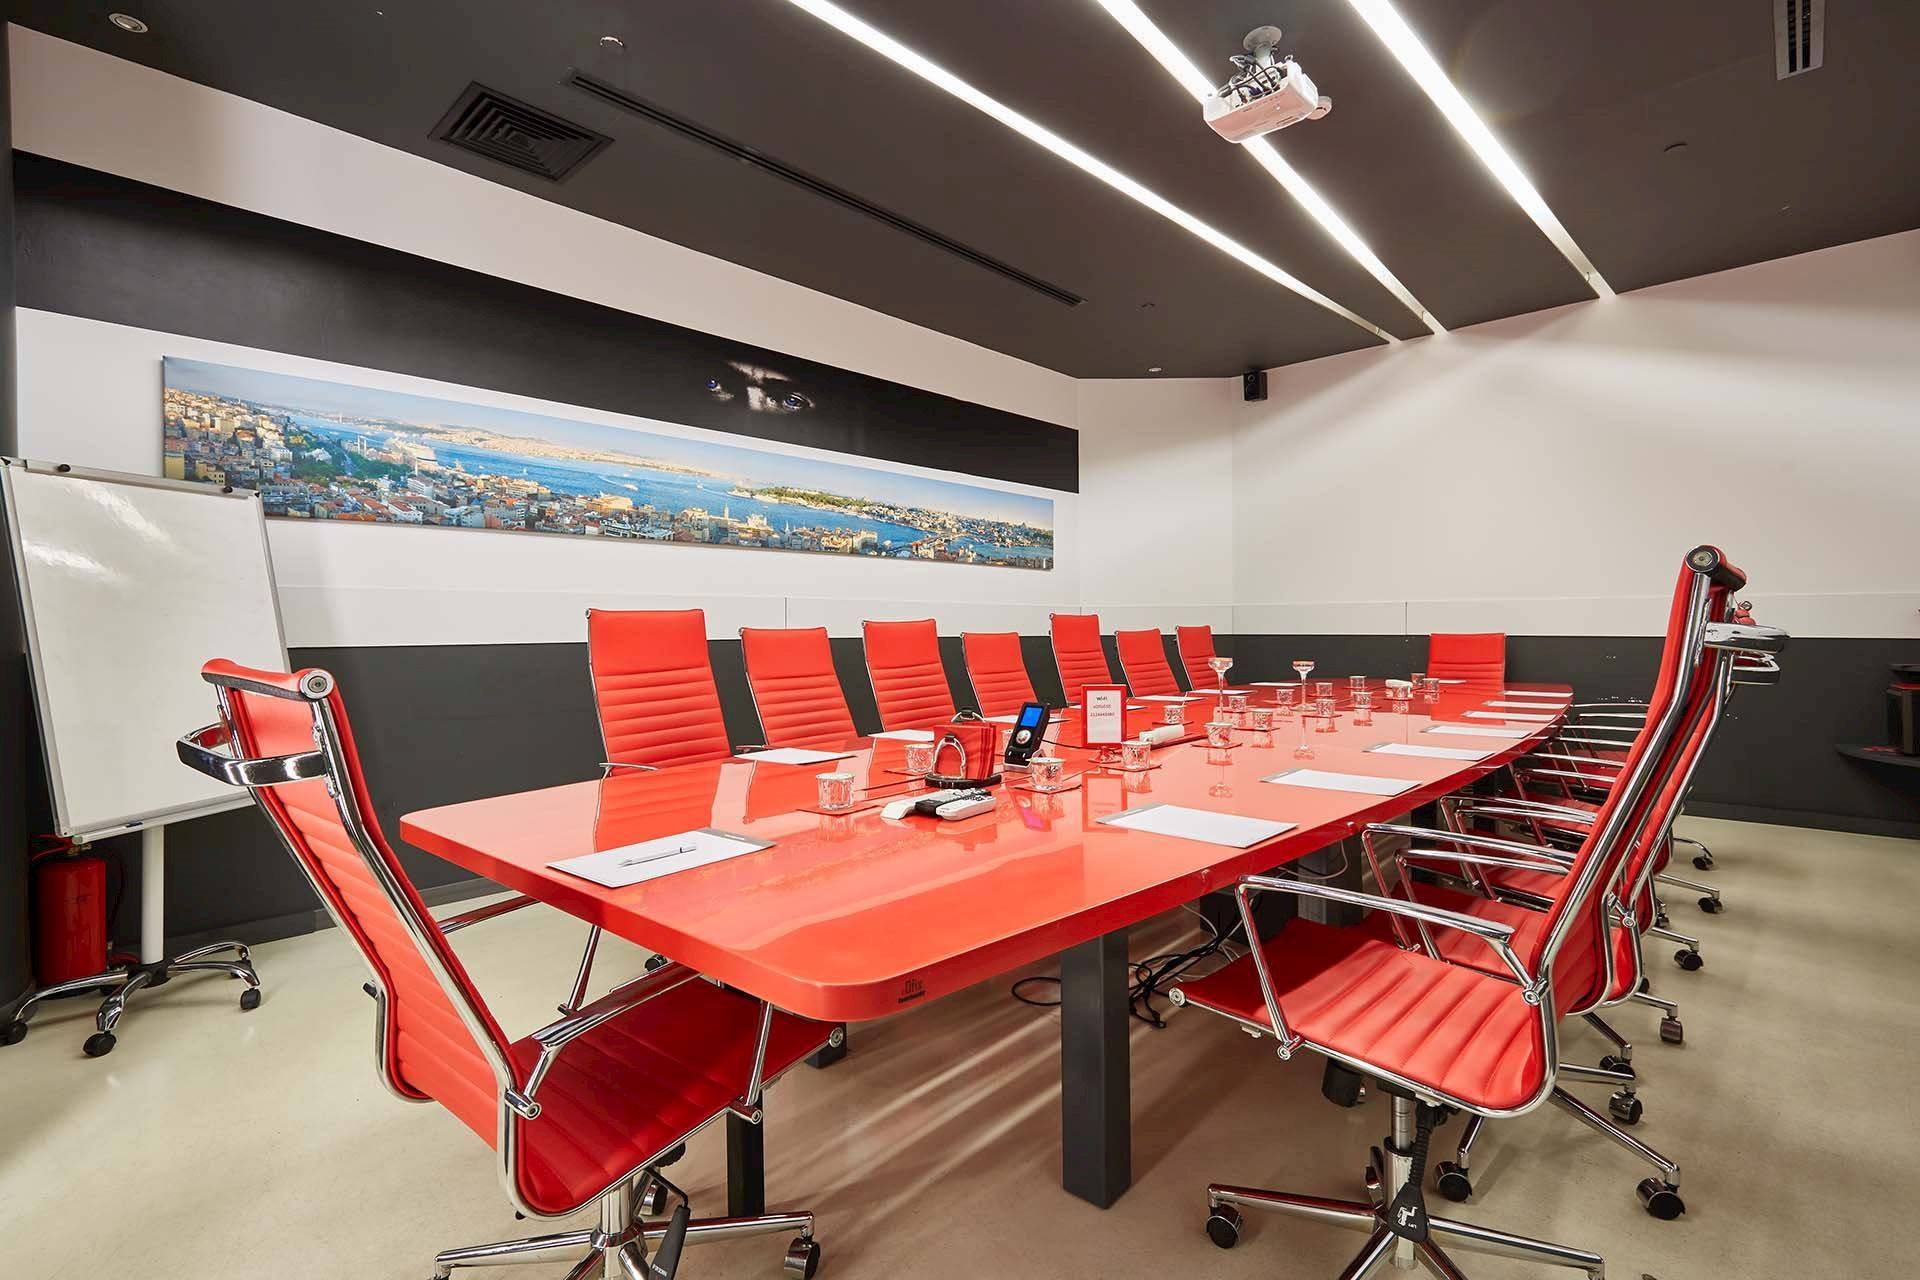 Meeting & Conference Rooms

